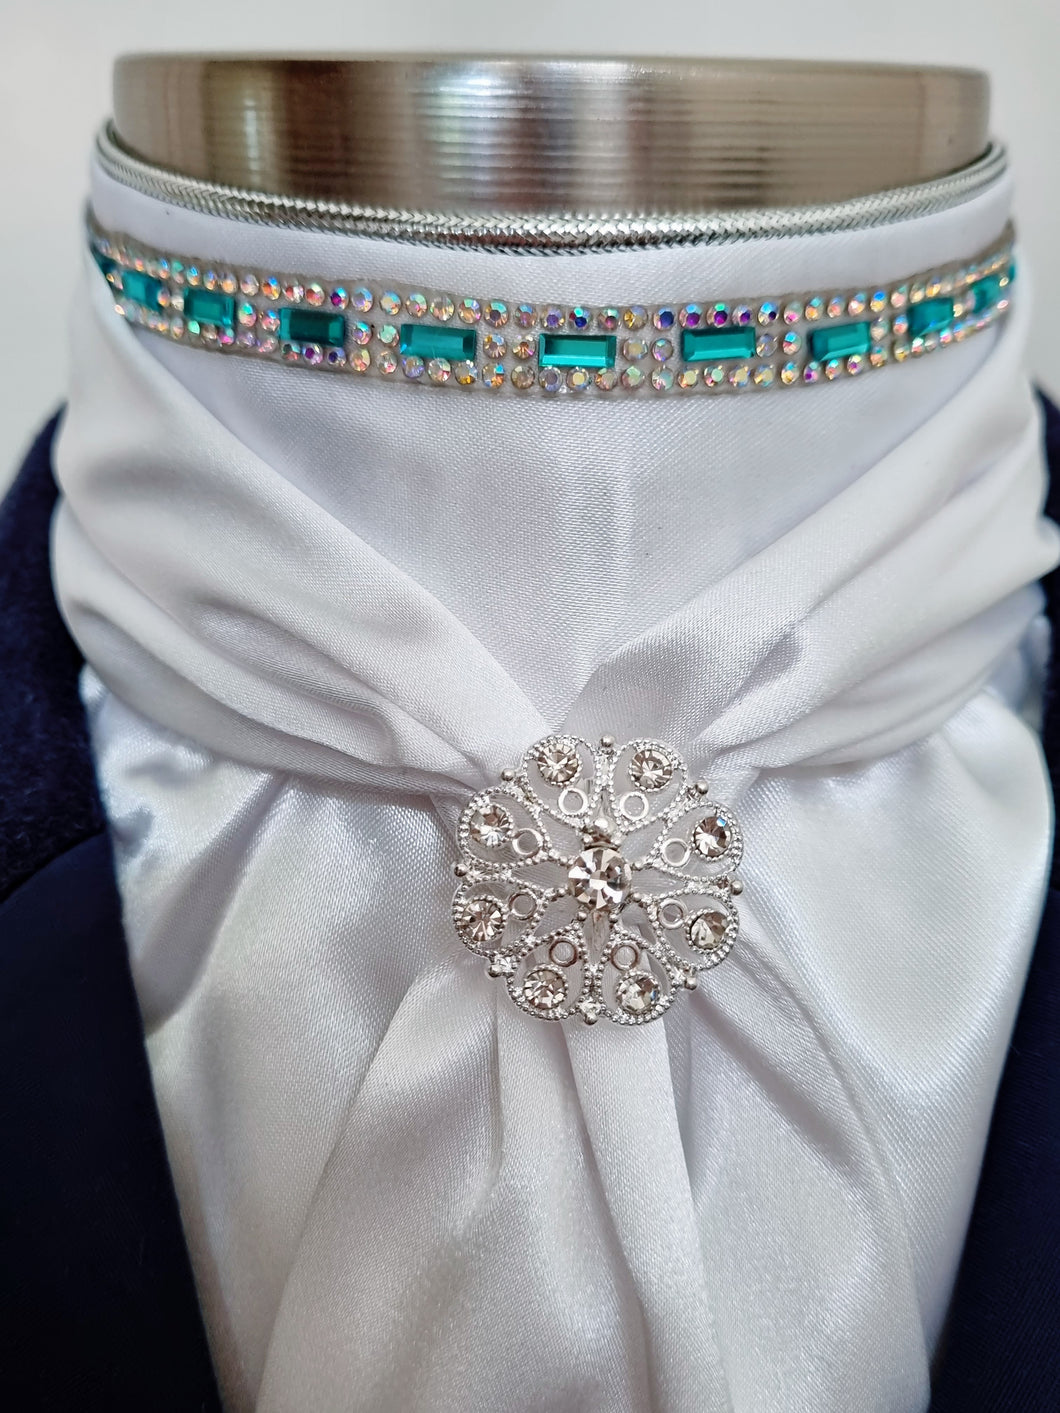 ERA Elle Stock Tie - Soft Ties with Aqua & clear crystal trim, piping and Brooch